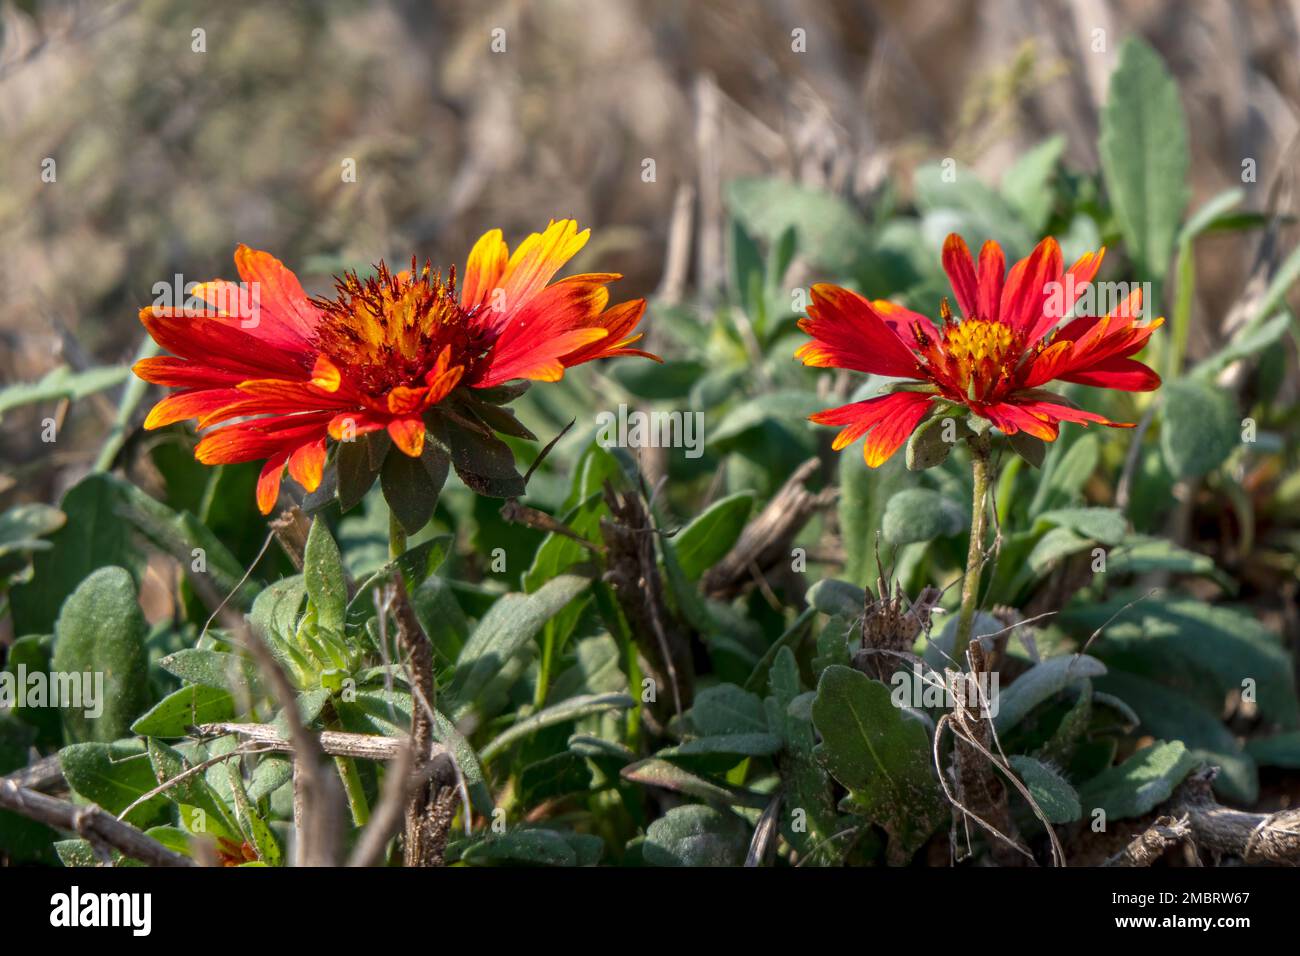 Colorful Blanket flower Gaillardia flower on blurred background close up Selective focus Stock Photo